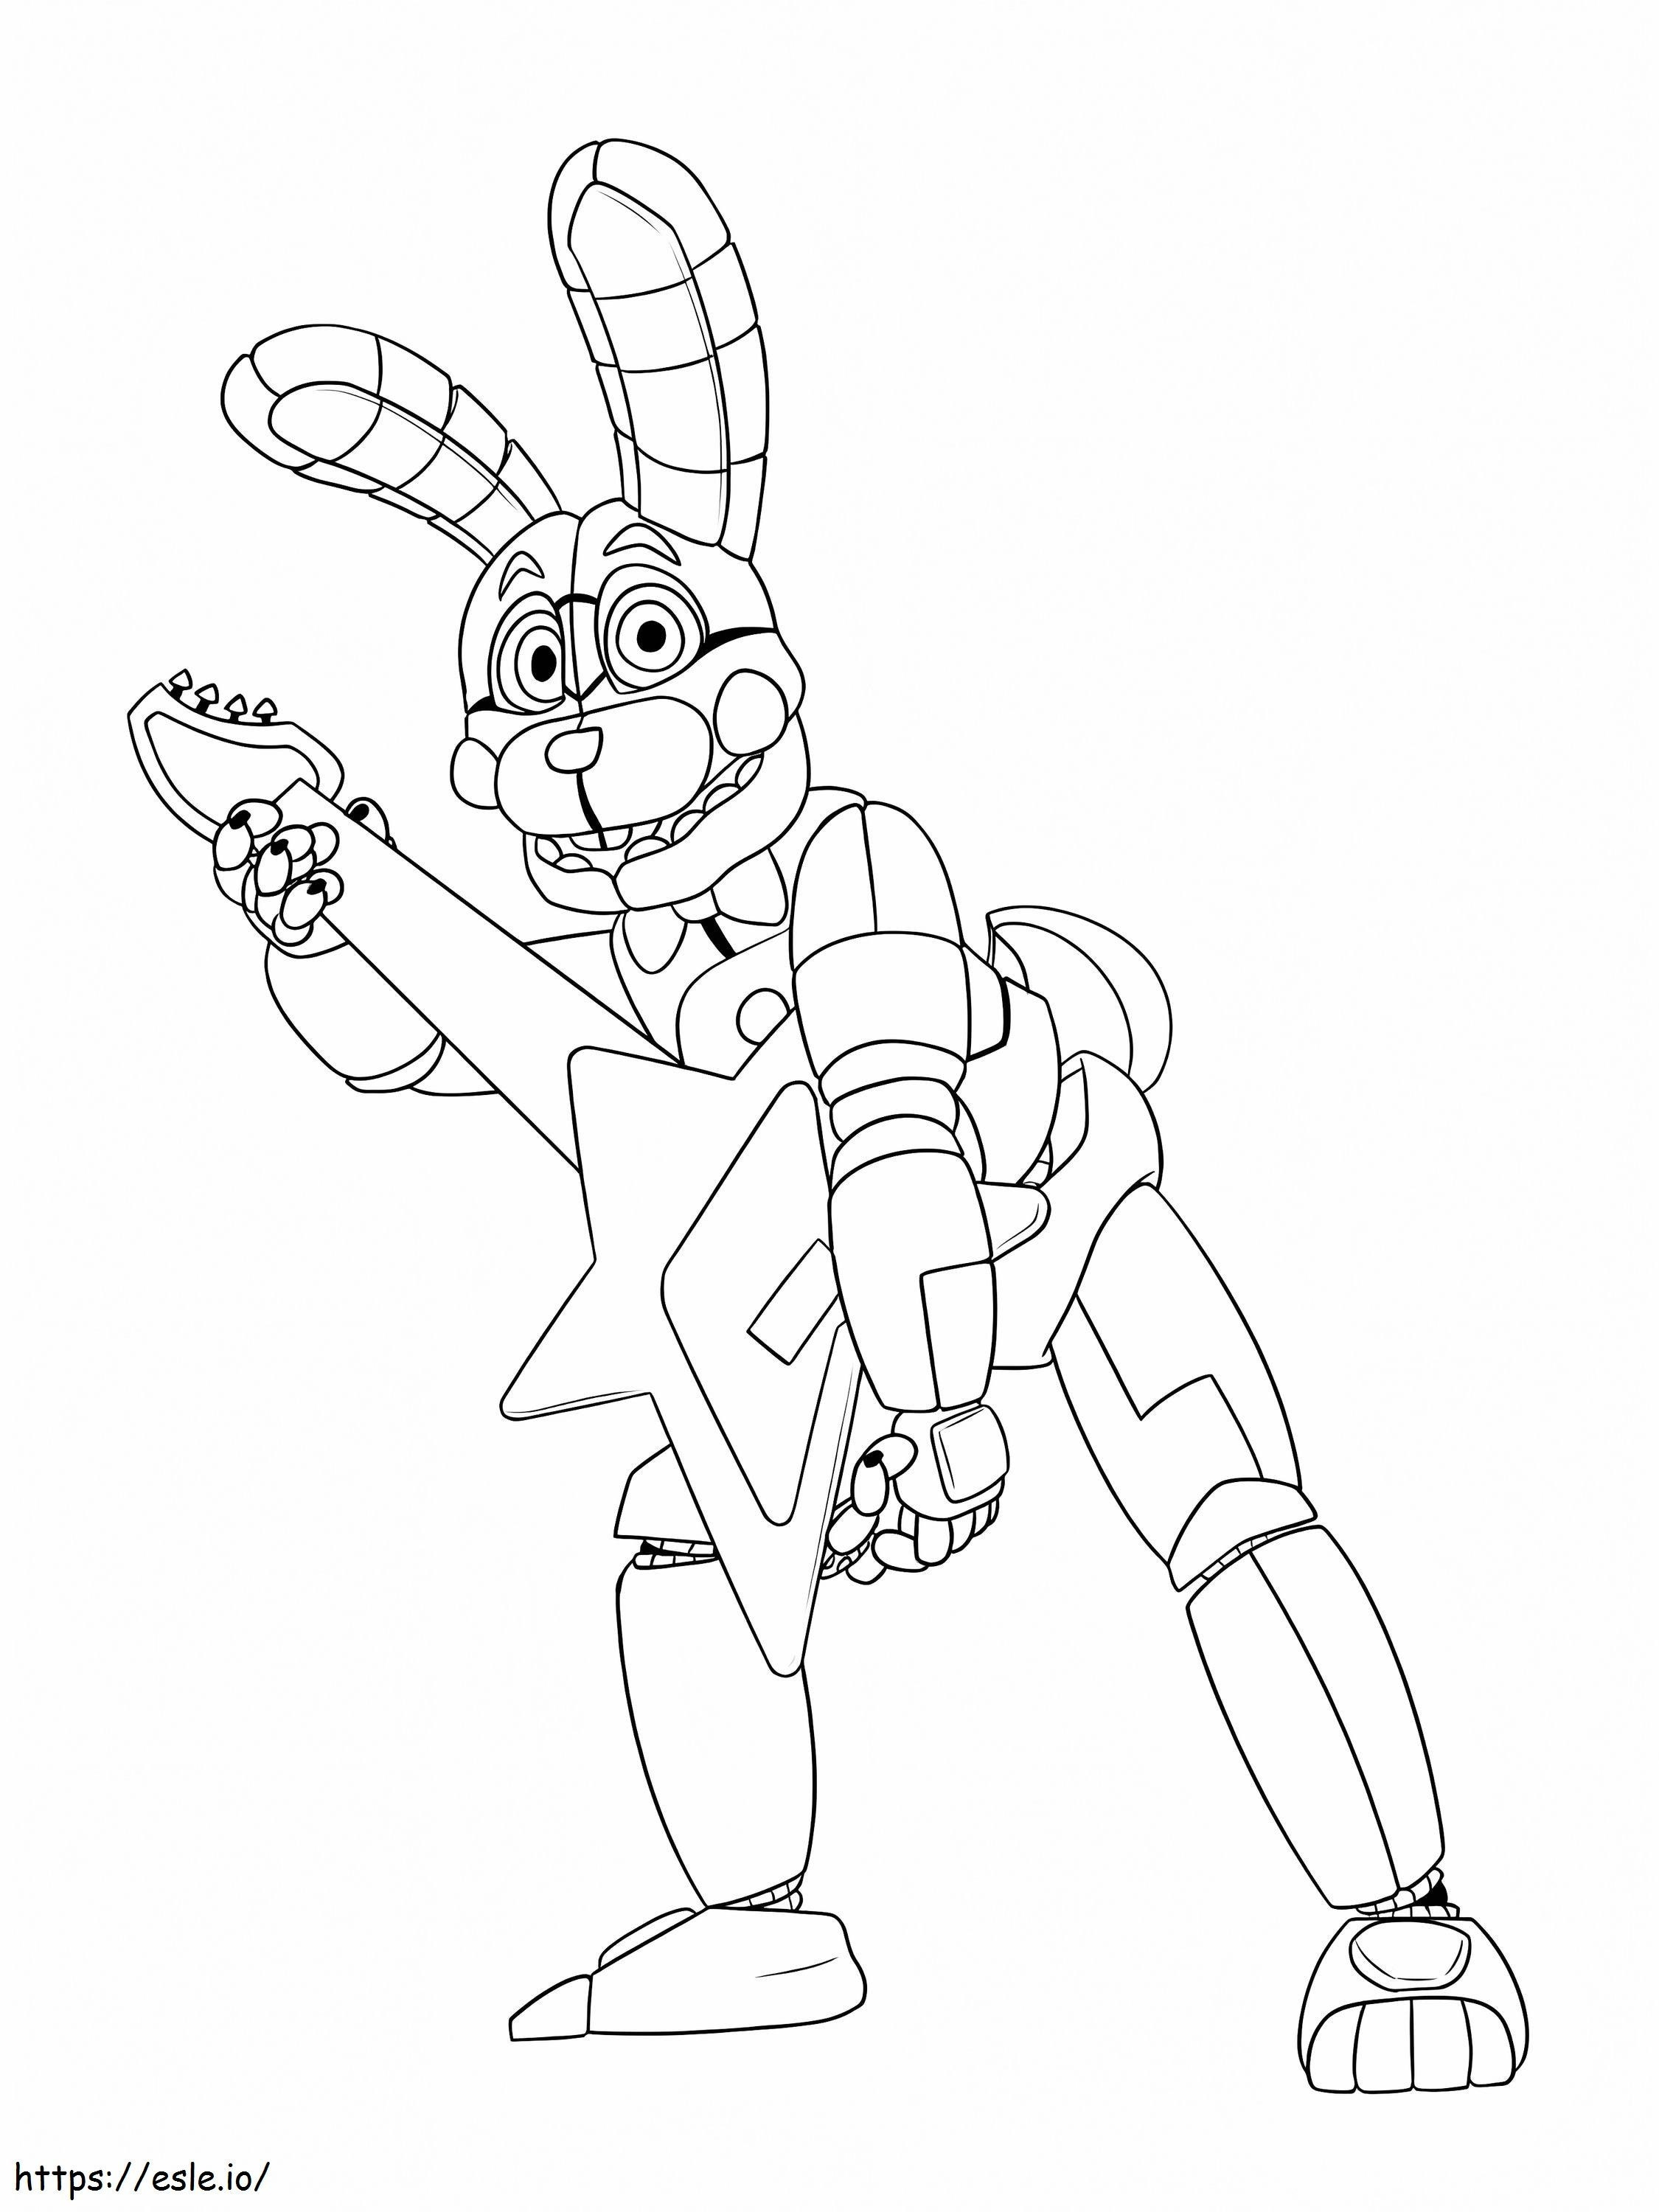 Toy Bonnie Playing Guitar coloring page